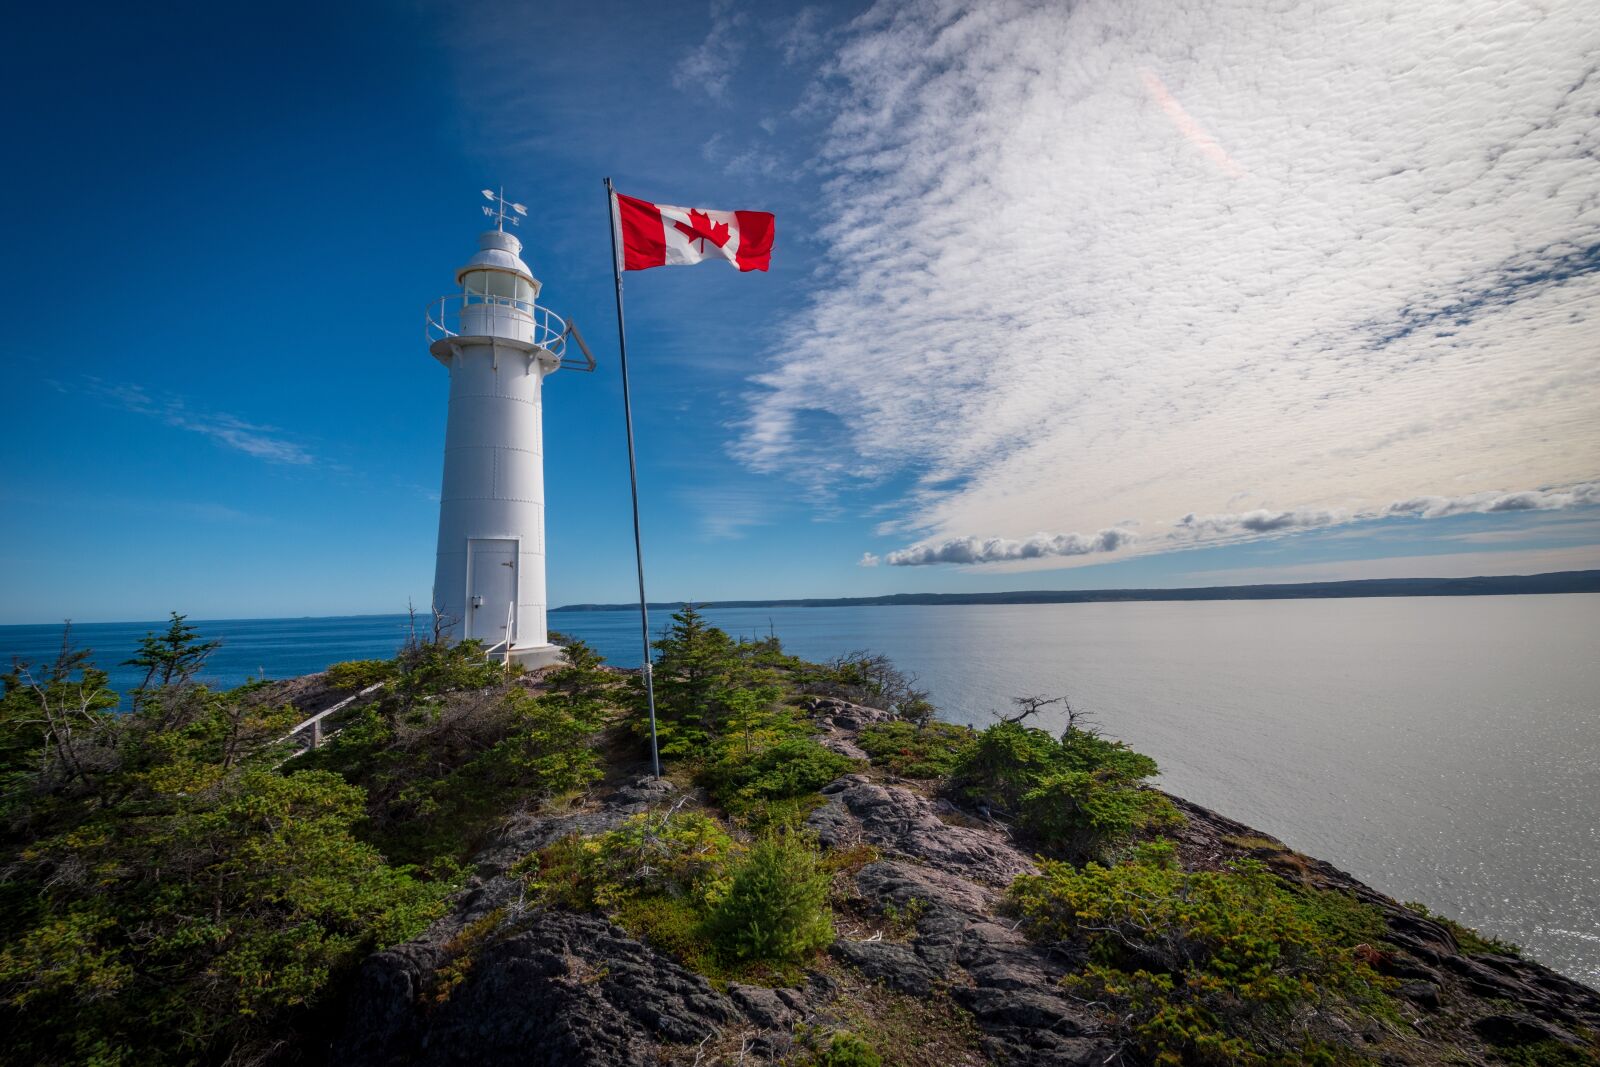 Tamron SP AF 10-24mm F3.5-4.5 Di II LD Aspherical (IF) sample photo. Lighthouse, flag, canada photography